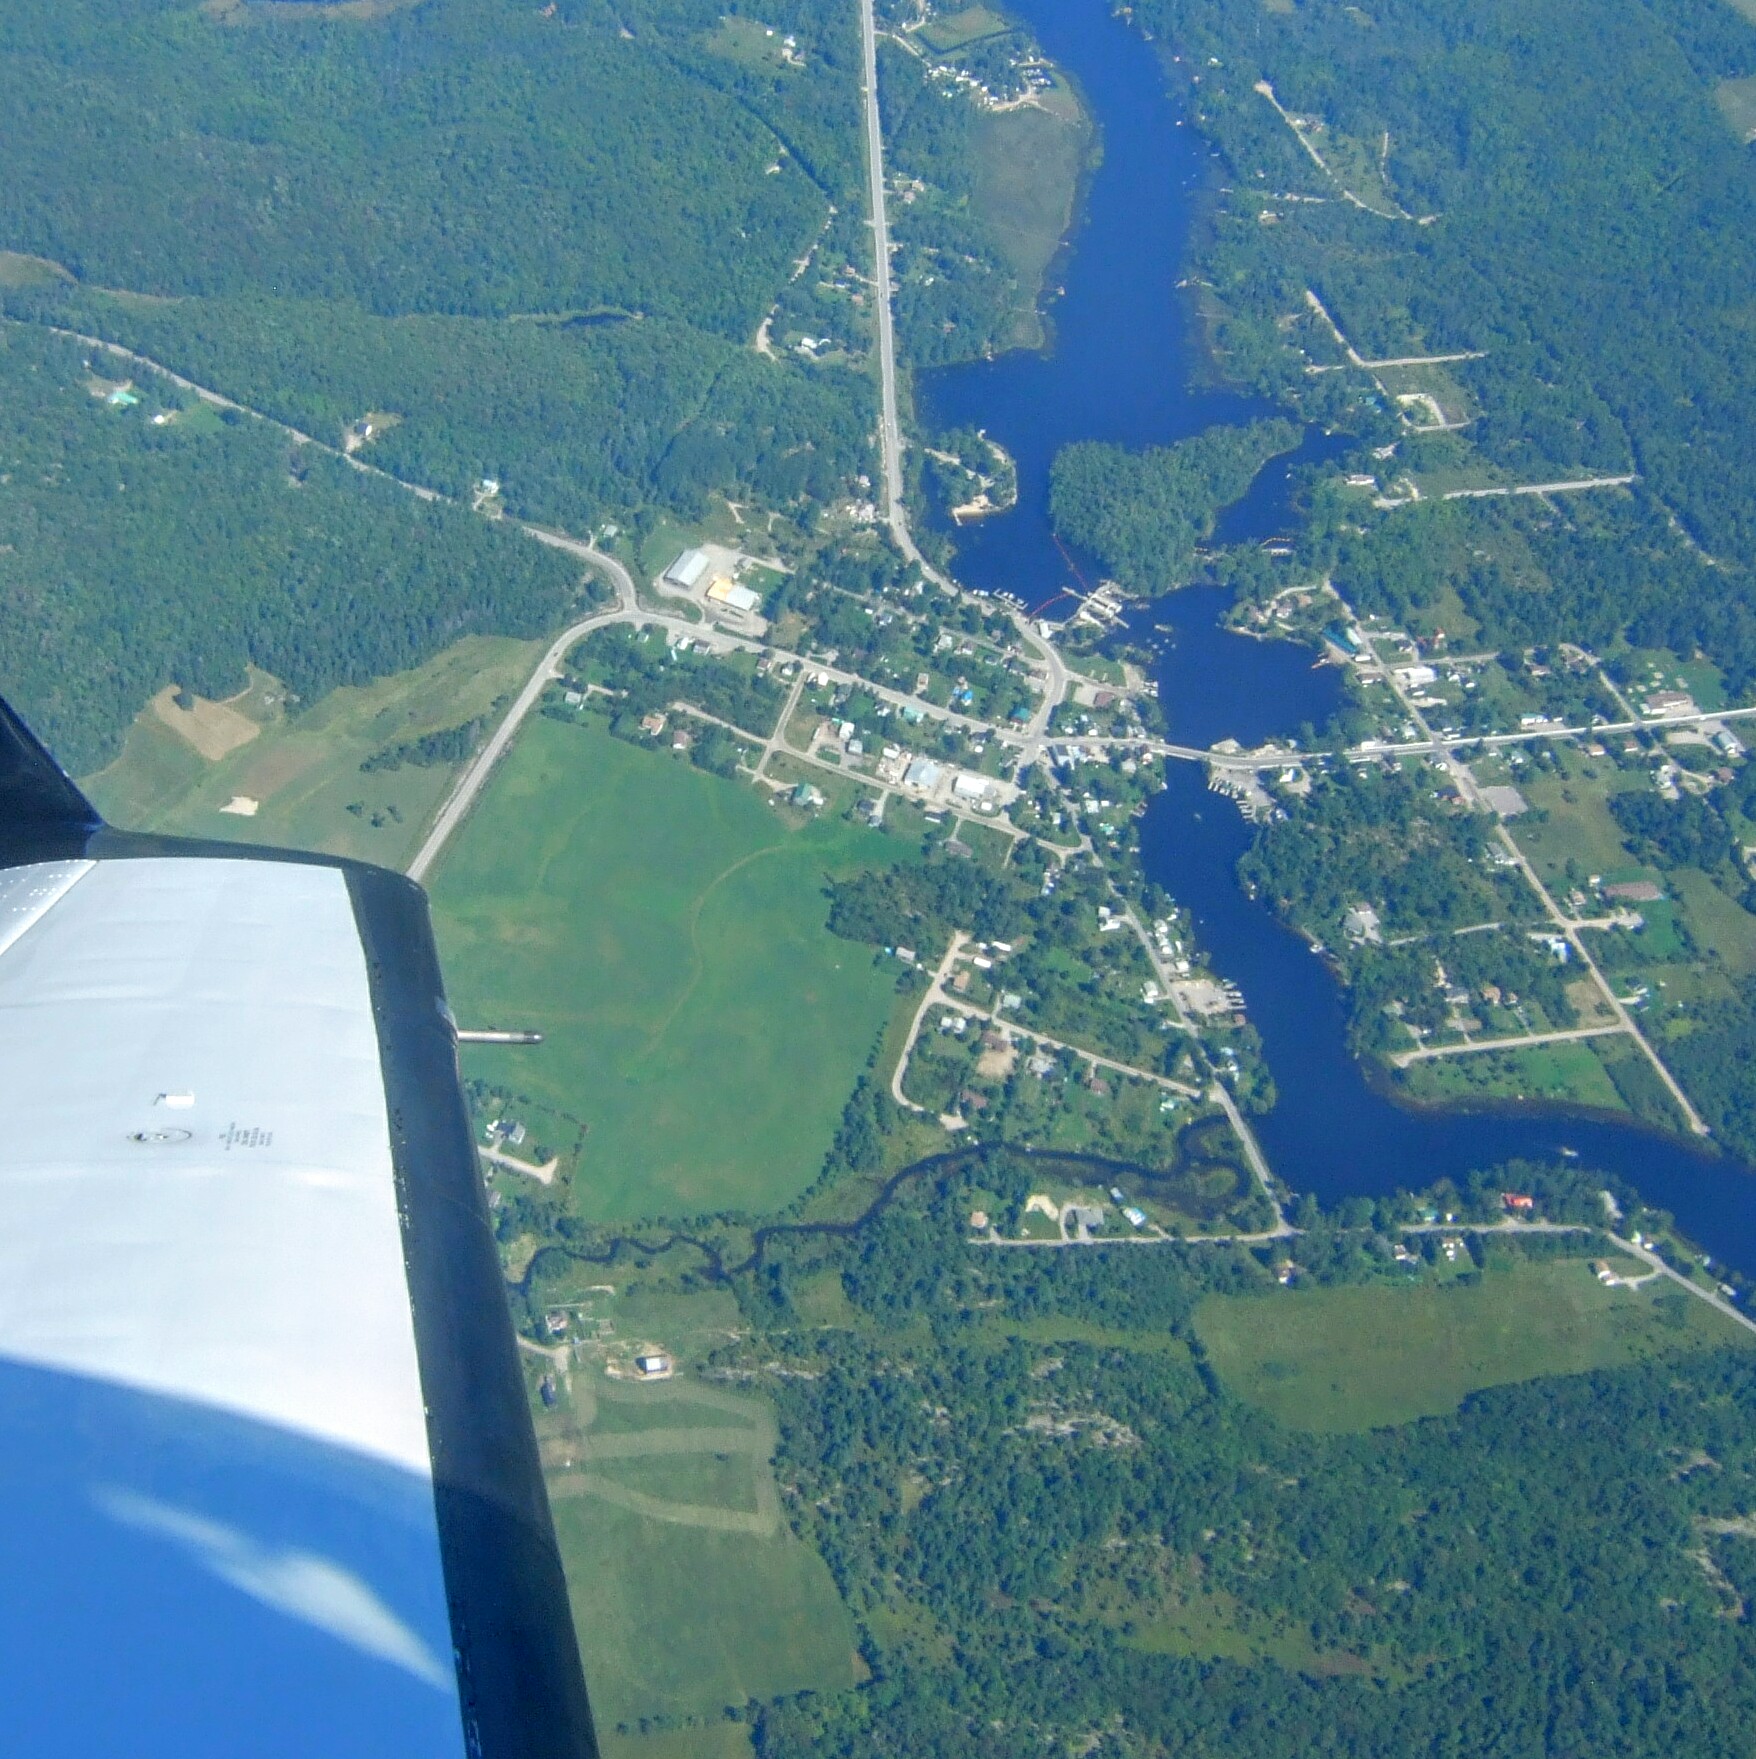 Arial View from an airplane that include a lake and town